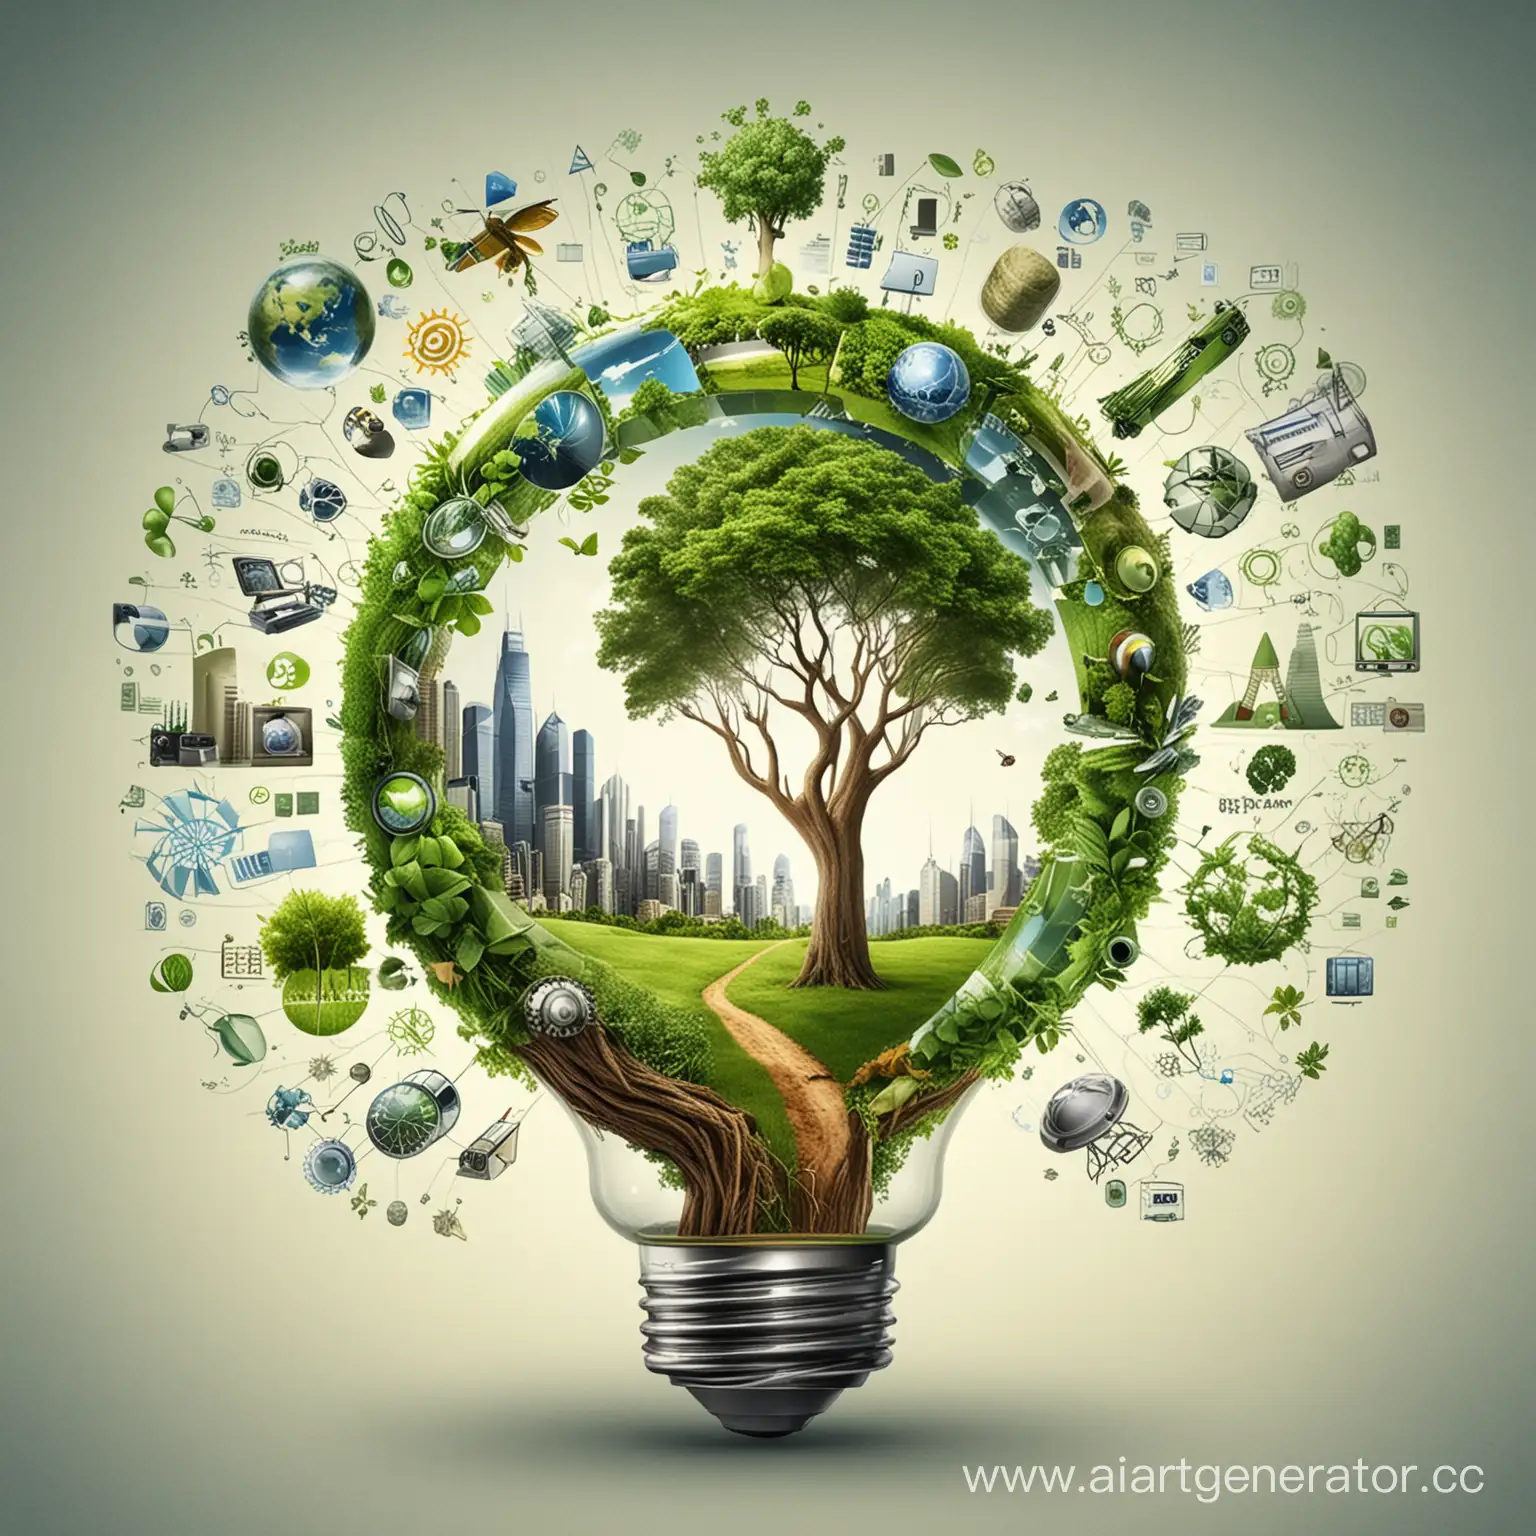 Ecological-Innovations-and-Sustainable-Technologies-Advancing-Environmental-Solutions